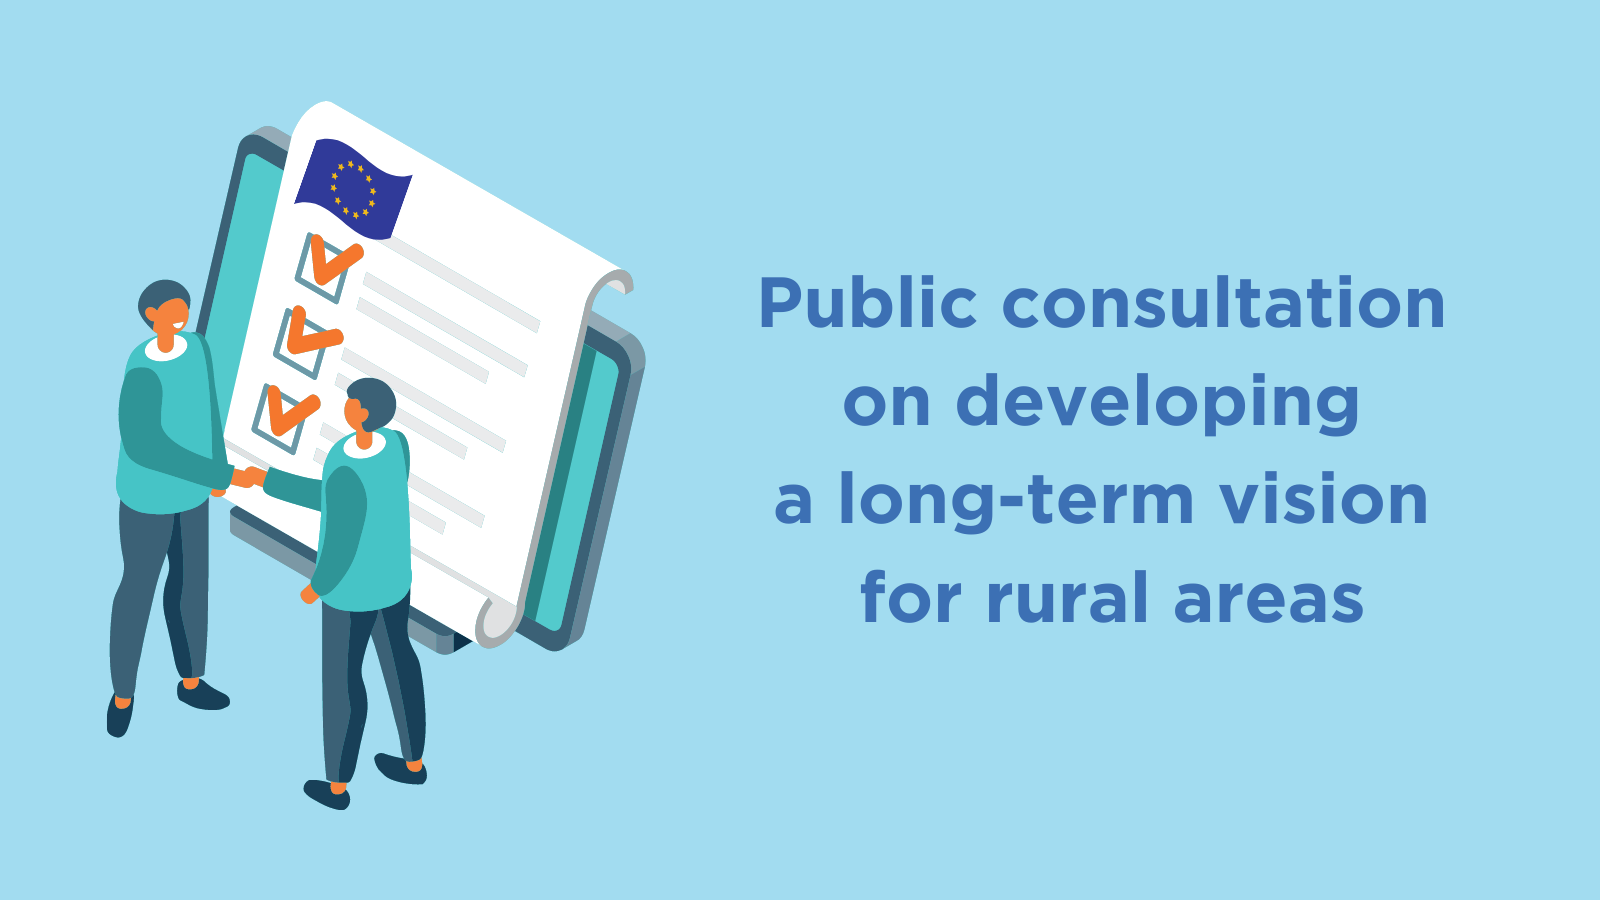 PUBLIC CONSULTATION ON DEVELOPING A LONG-TERM VISION FOR RURAL AREAS